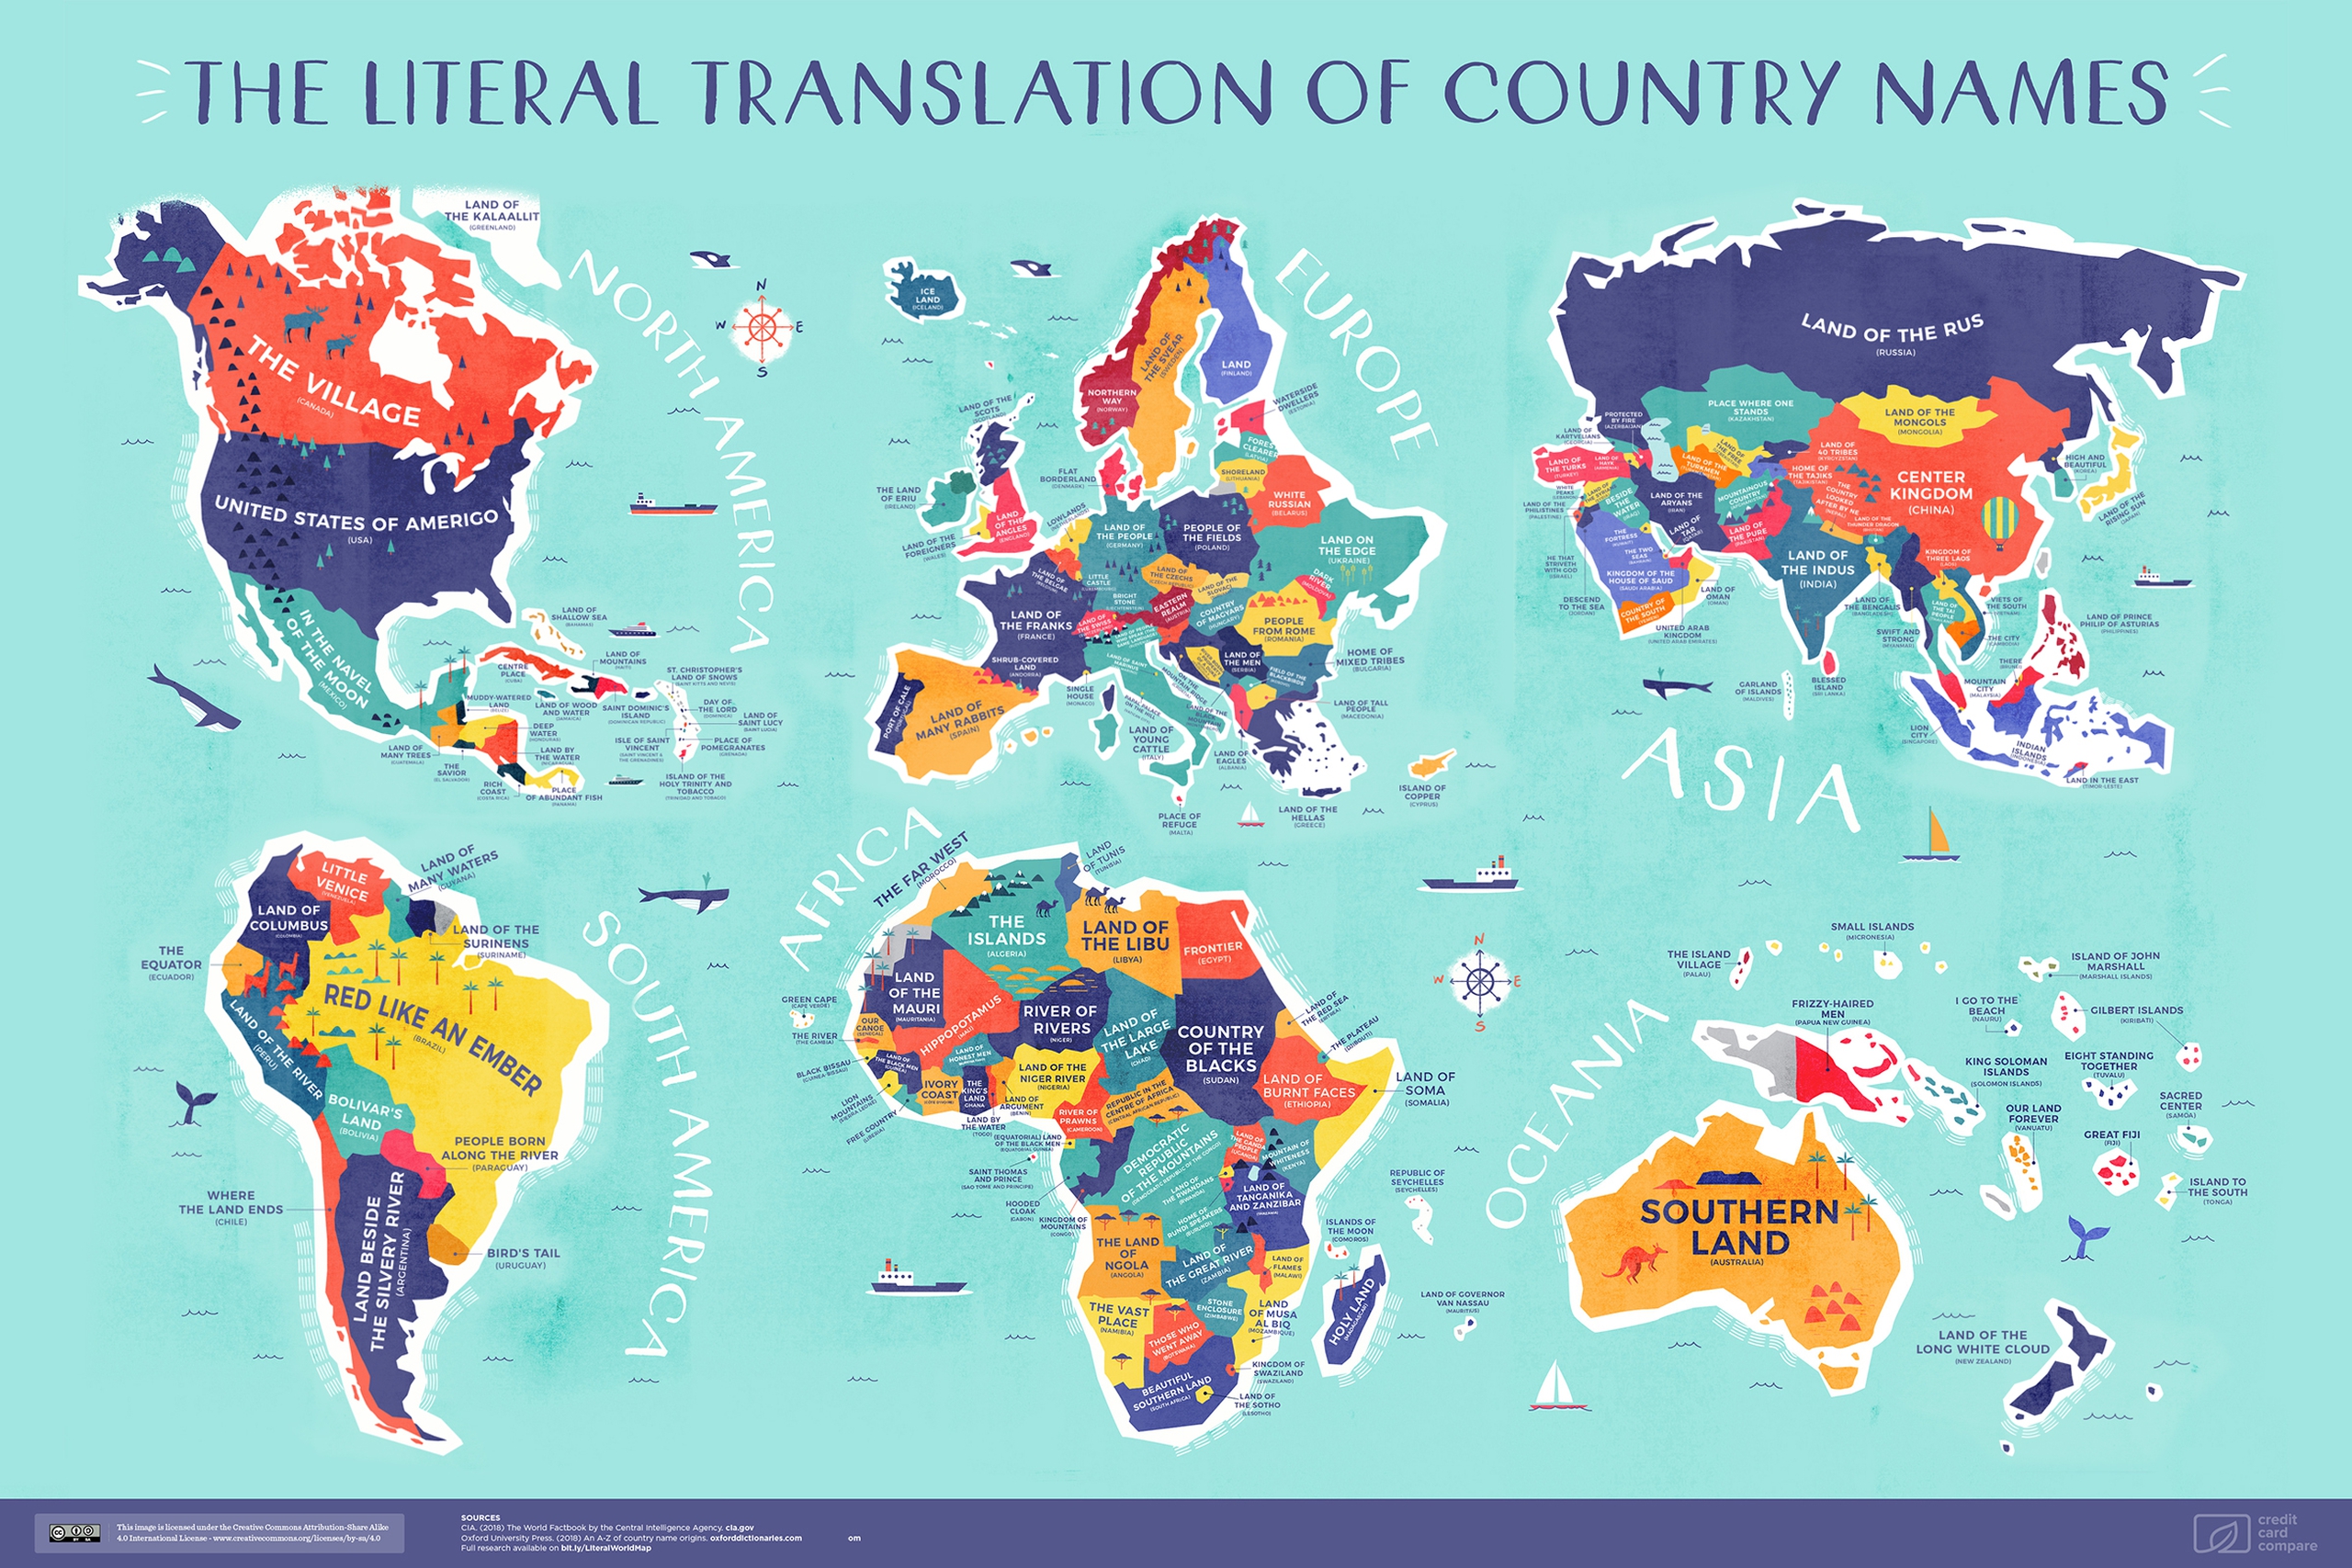 Map examples of Credit Card Compare's literal translation of country names